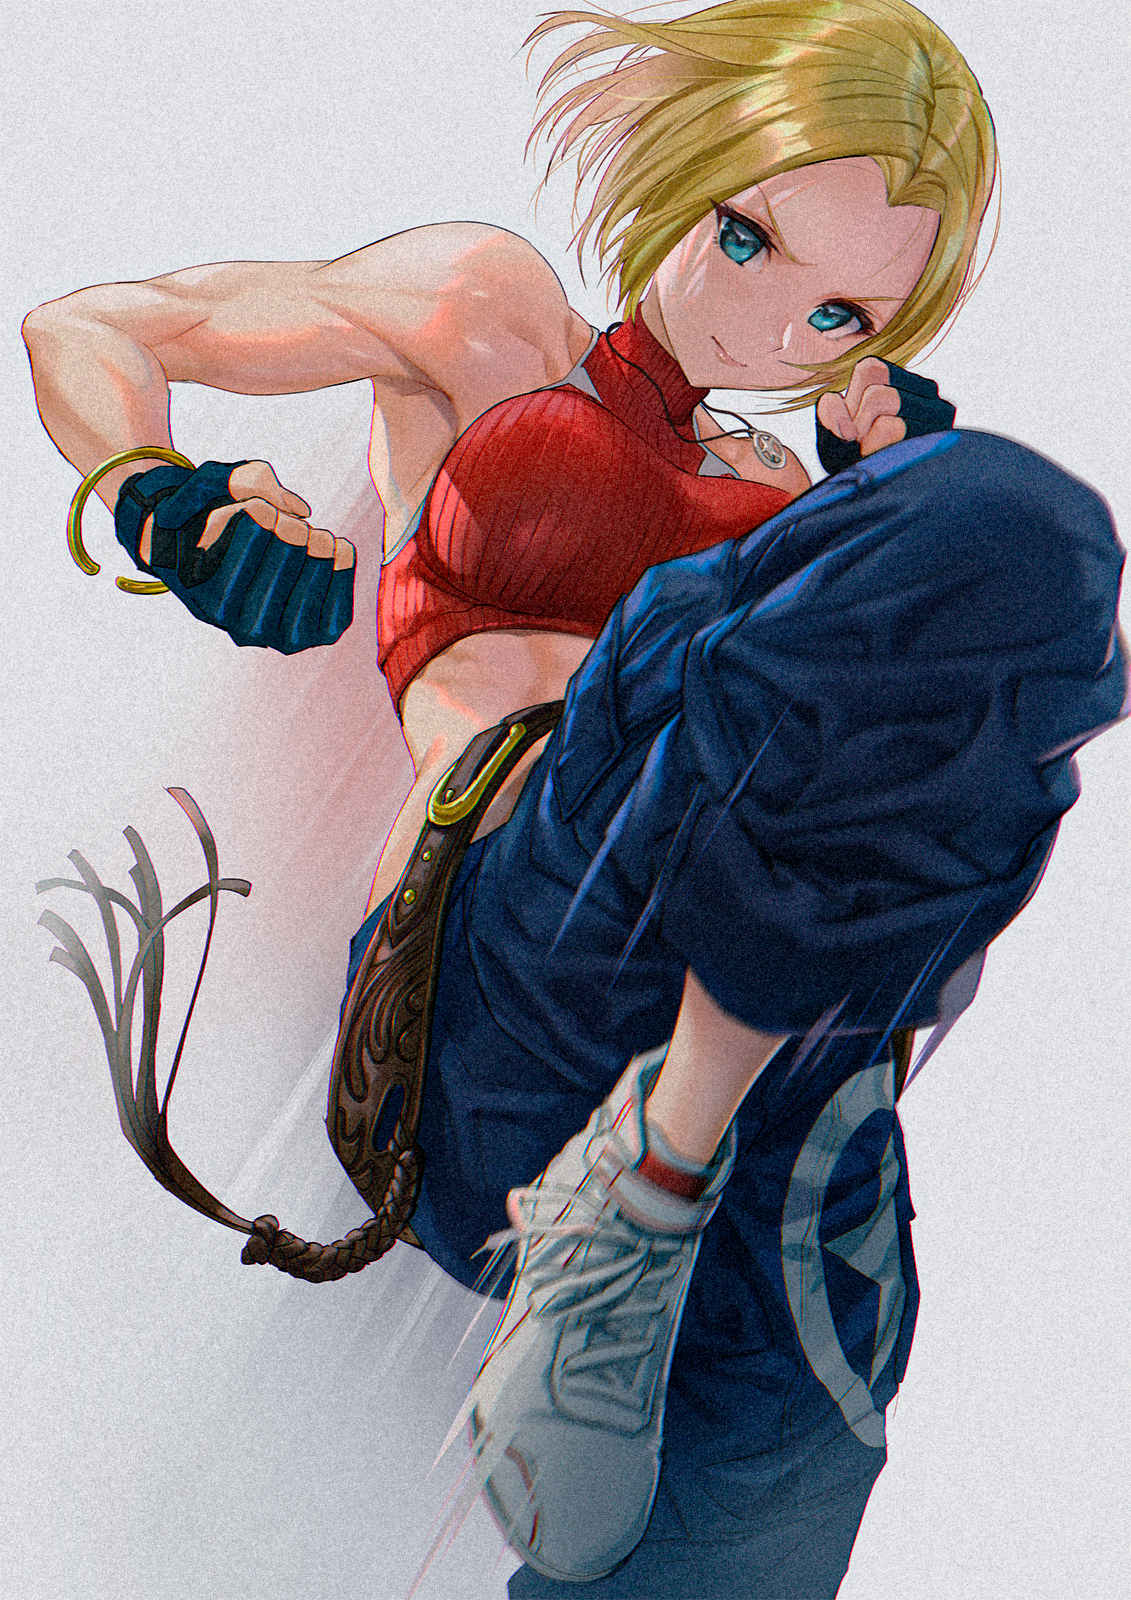 Anime 1131x1600 anime anime girls King of Fighters short hair blue eyes Mechamania Blue Mary (King of Fighters) video games video game girls video game warriors video game characters fist blonde